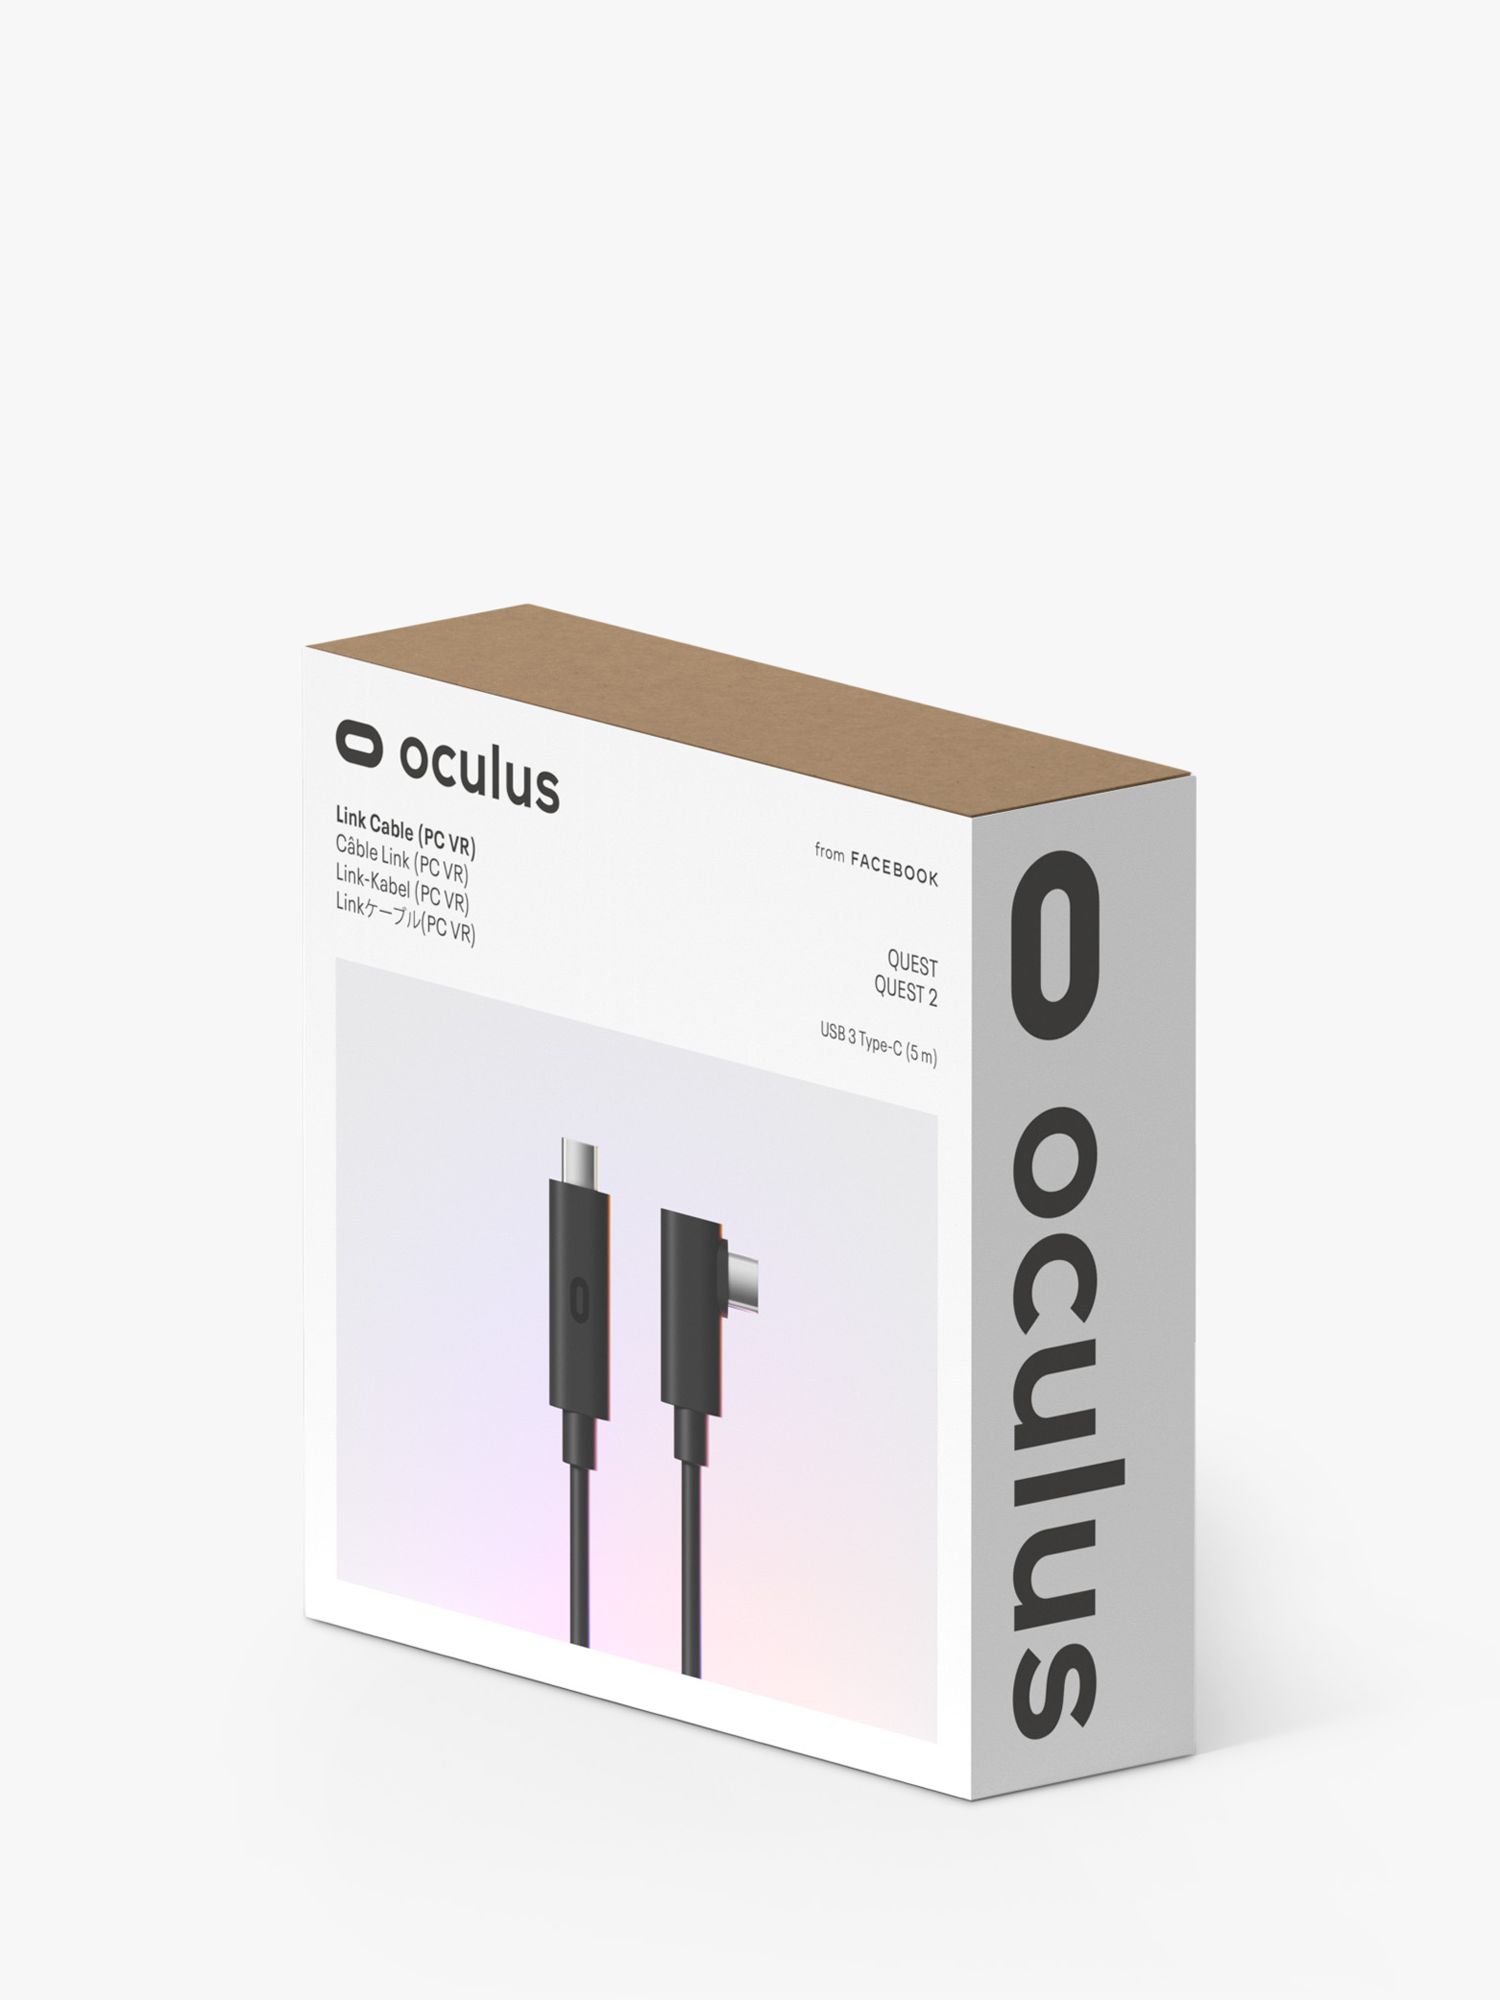 oculus link virtual reality headset cable